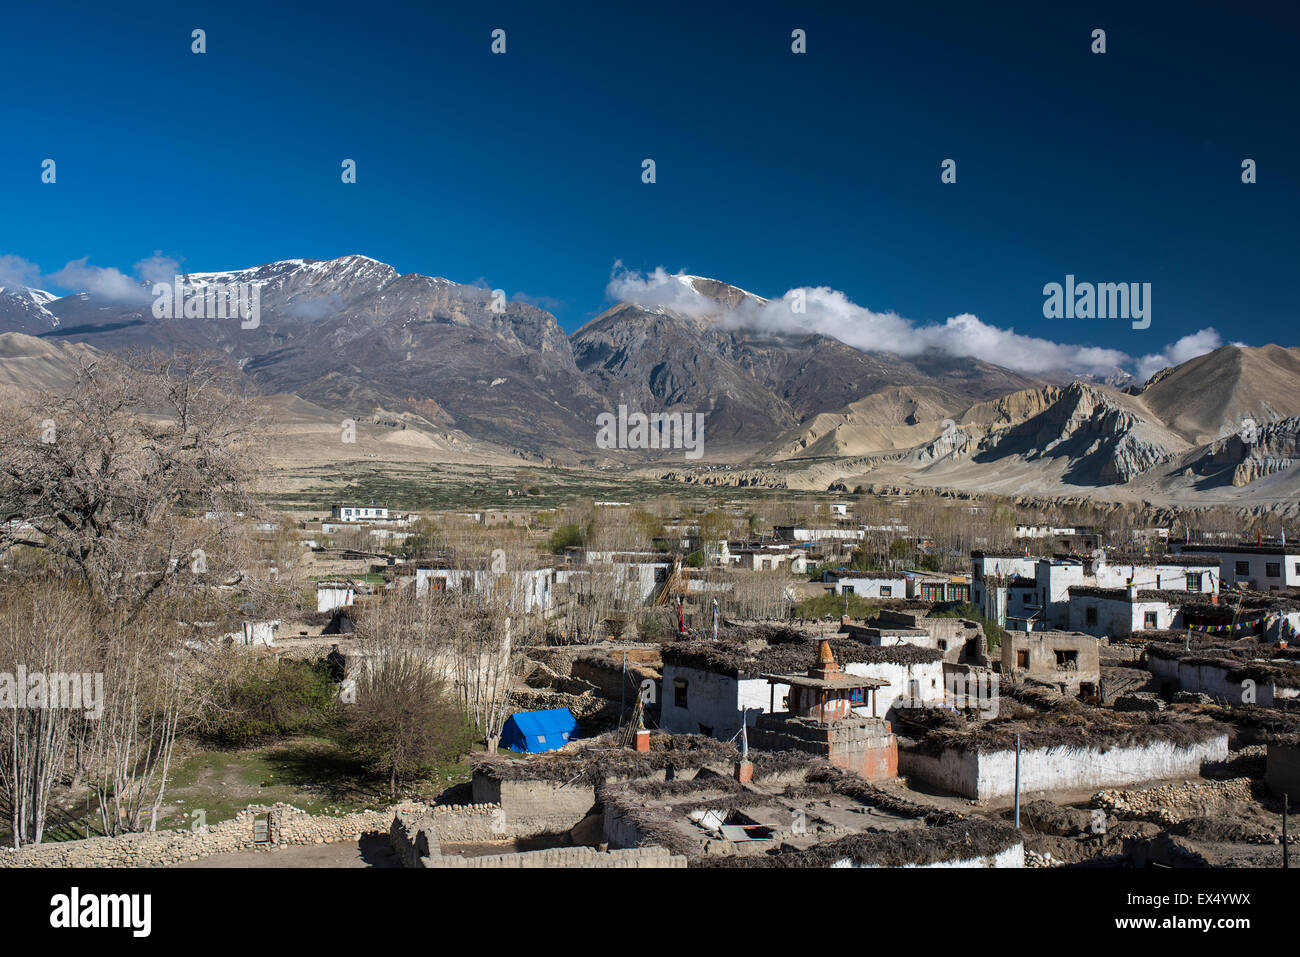 Traditional houses and Buddhist stupa in the village of Tsarang in front of mountain landscape, former Kingdom of Mustang, Nepal Stock Photo